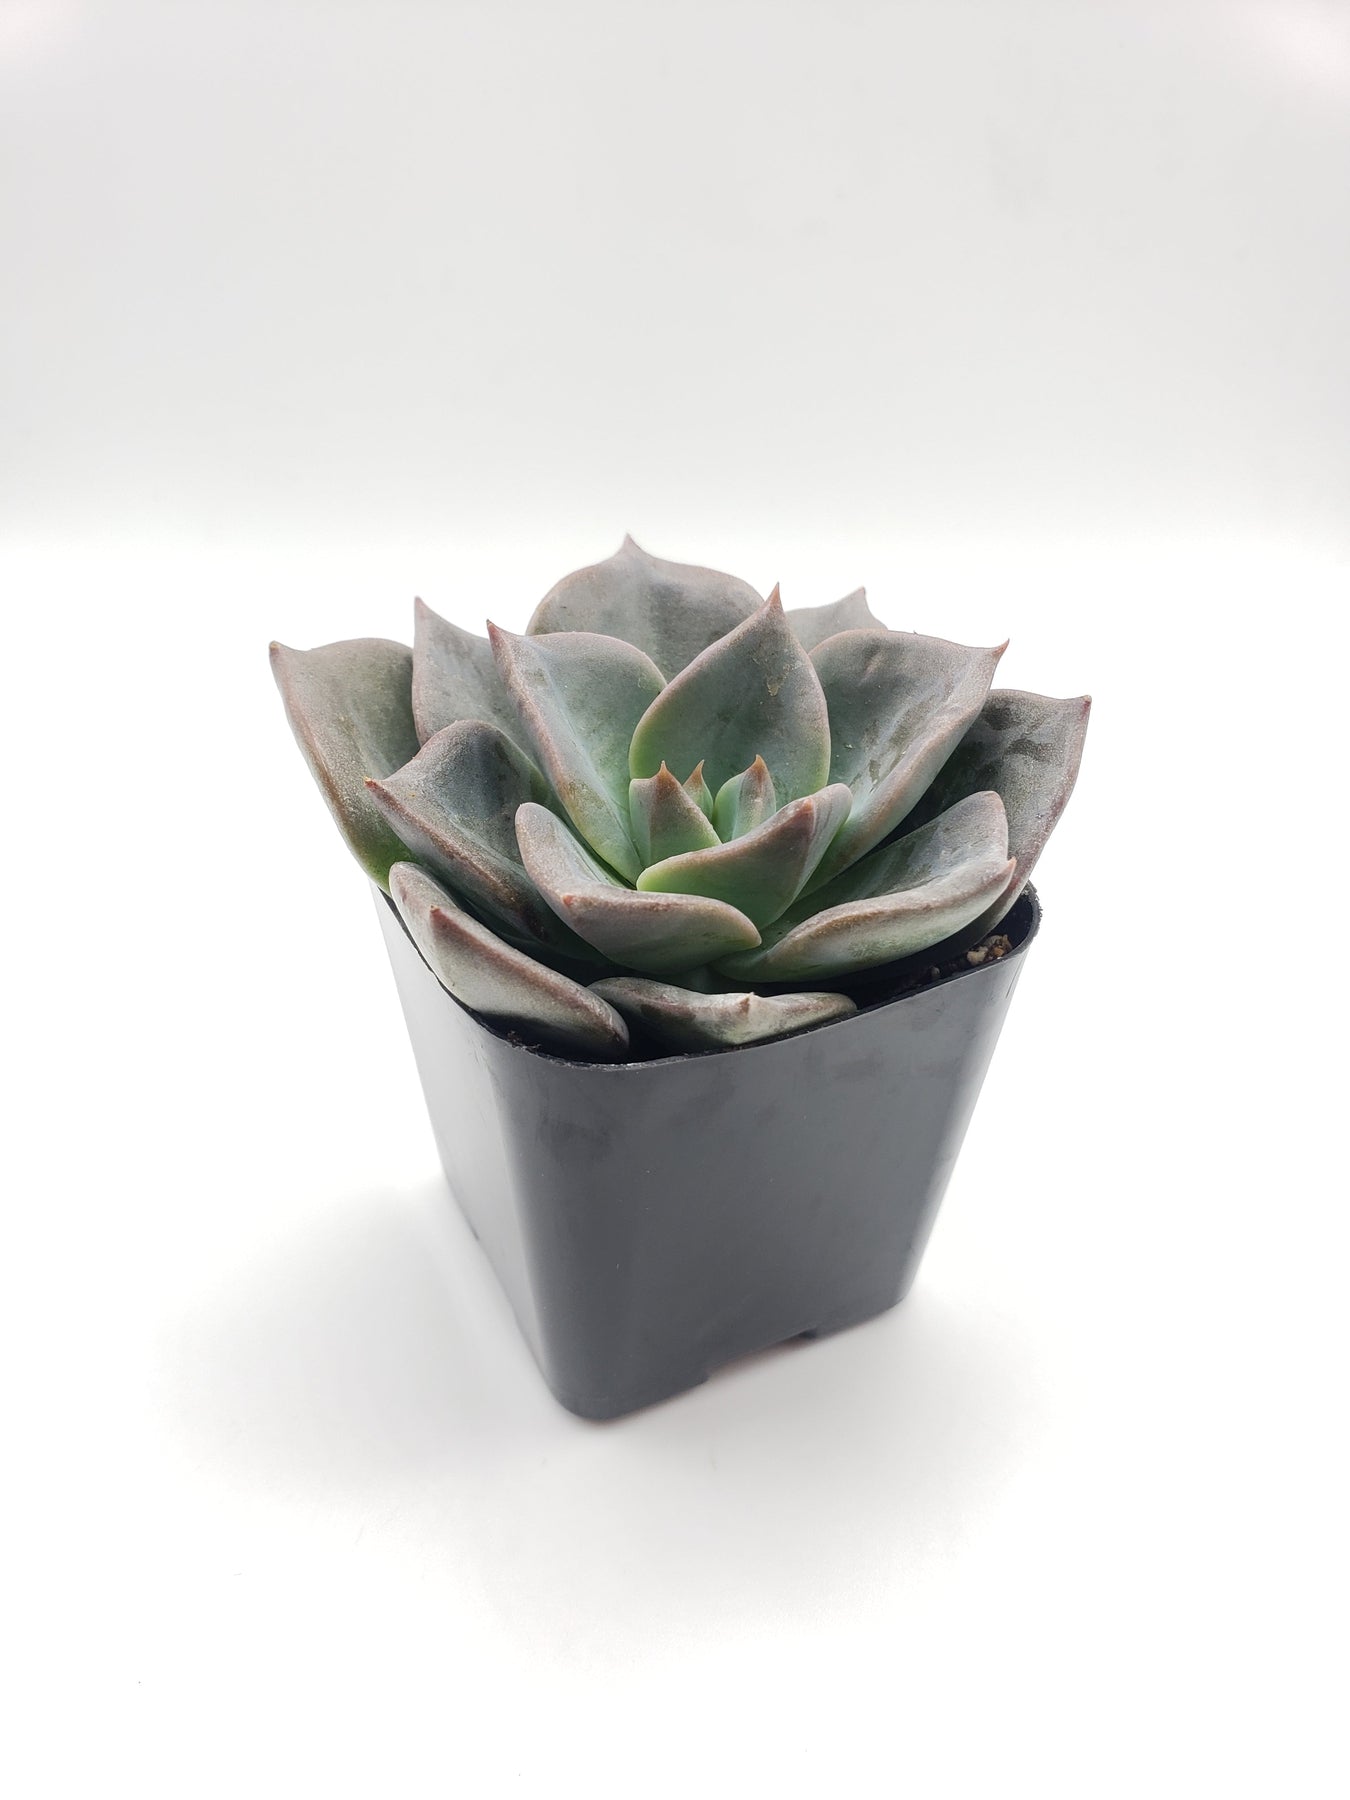 #25 Echeveria hybrid-Succulent - Small - Exact 2in Type-The Succulent Source